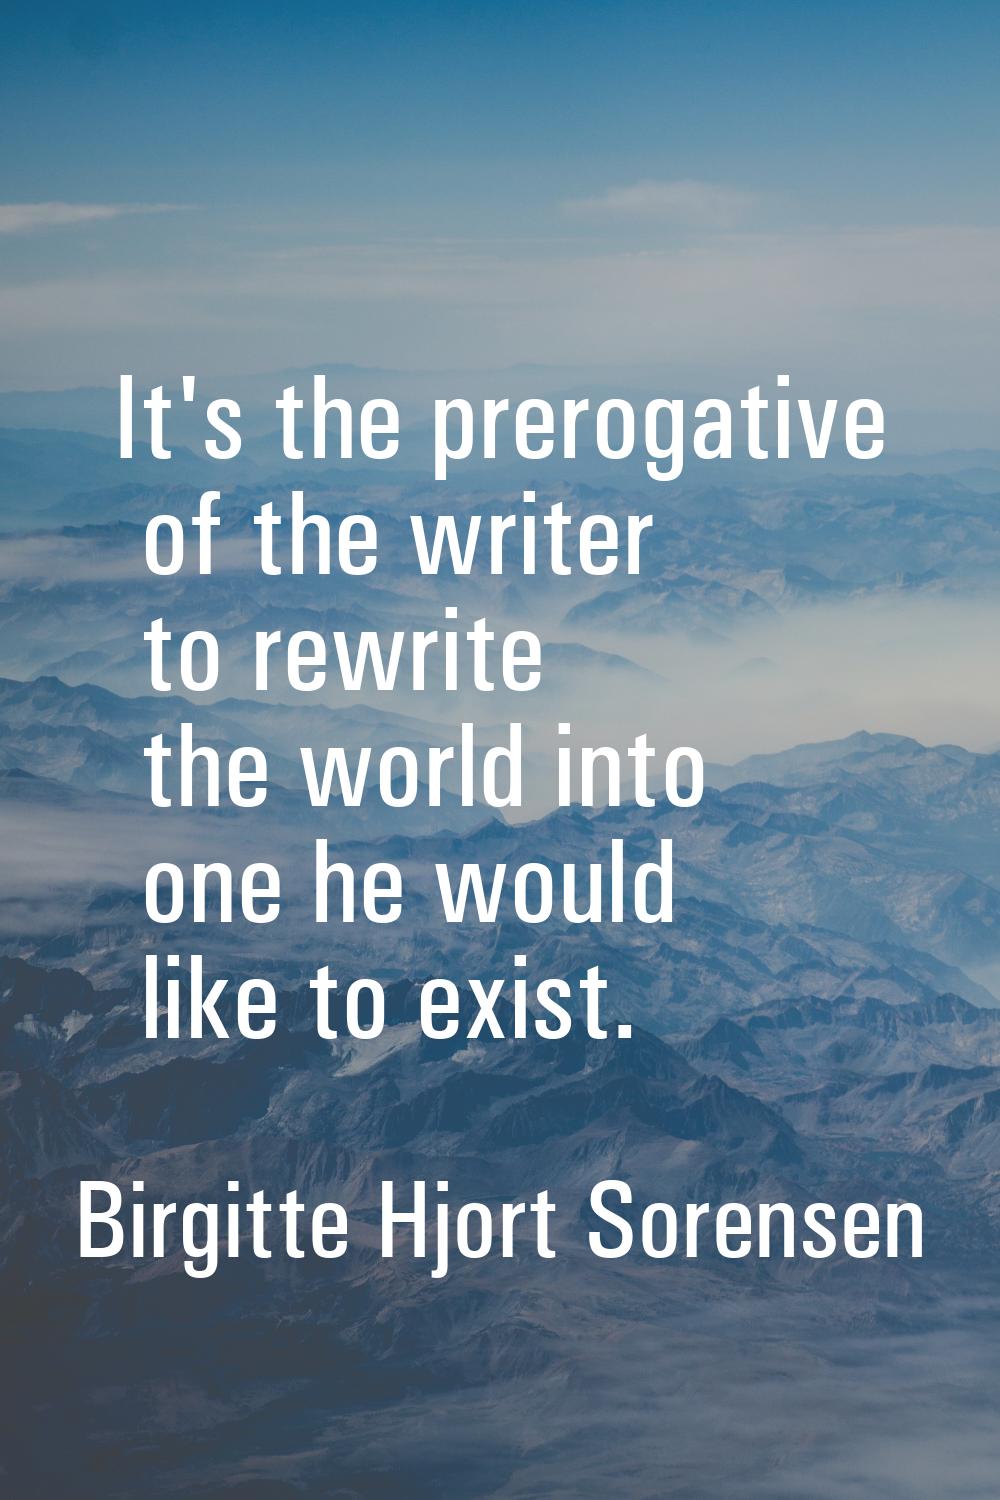 It's the prerogative of the writer to rewrite the world into one he would like to exist.